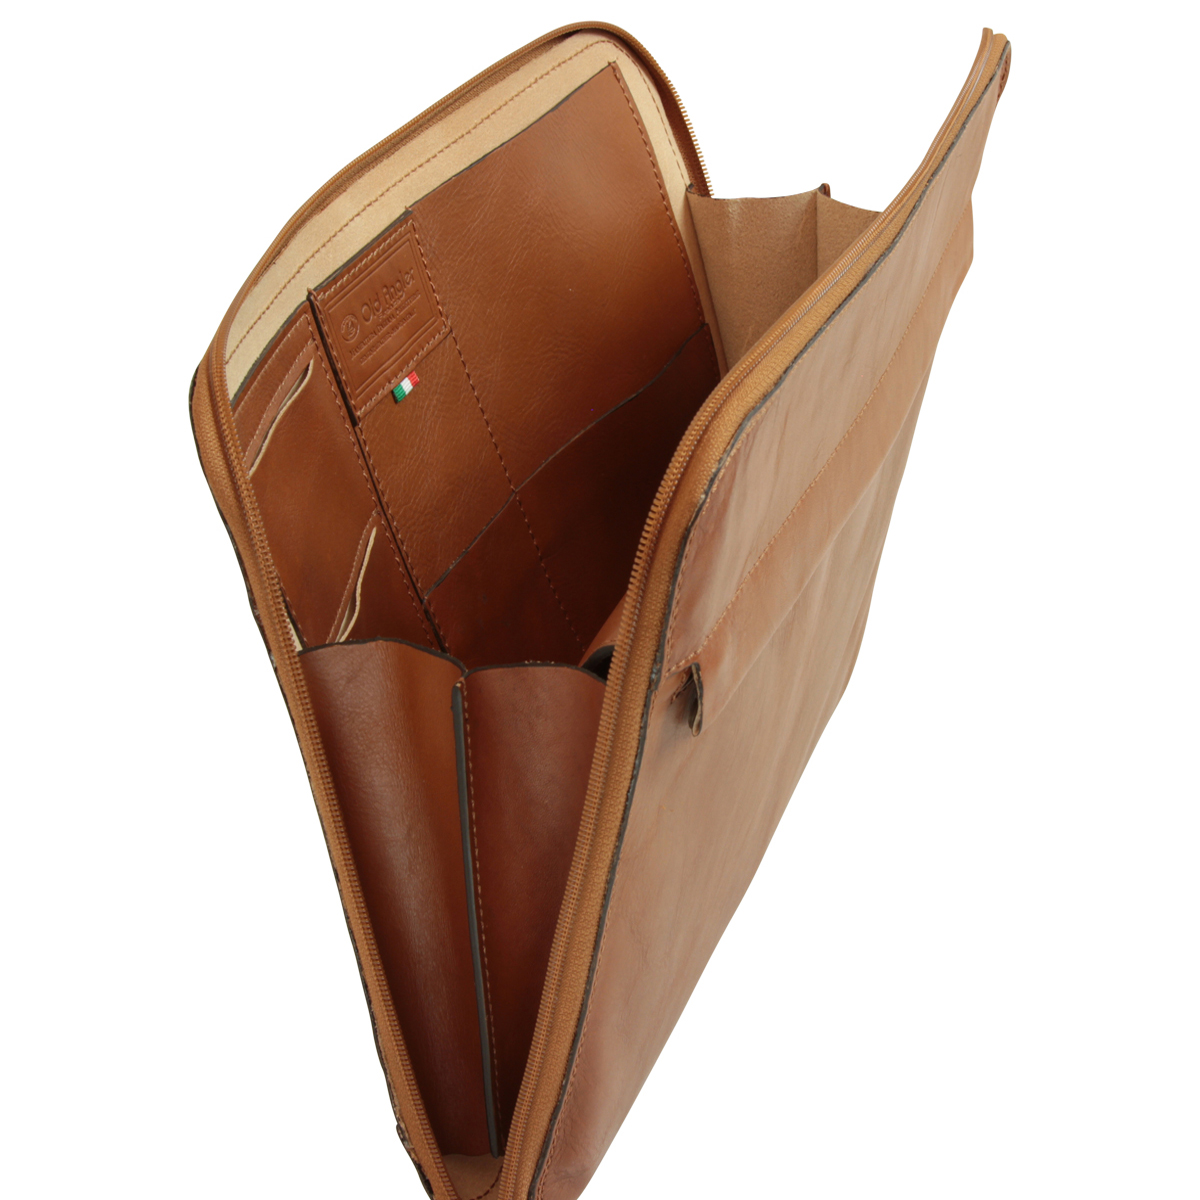 Leather Folder - Brown Colonial | 056889CO UK | Old Angler Firenze